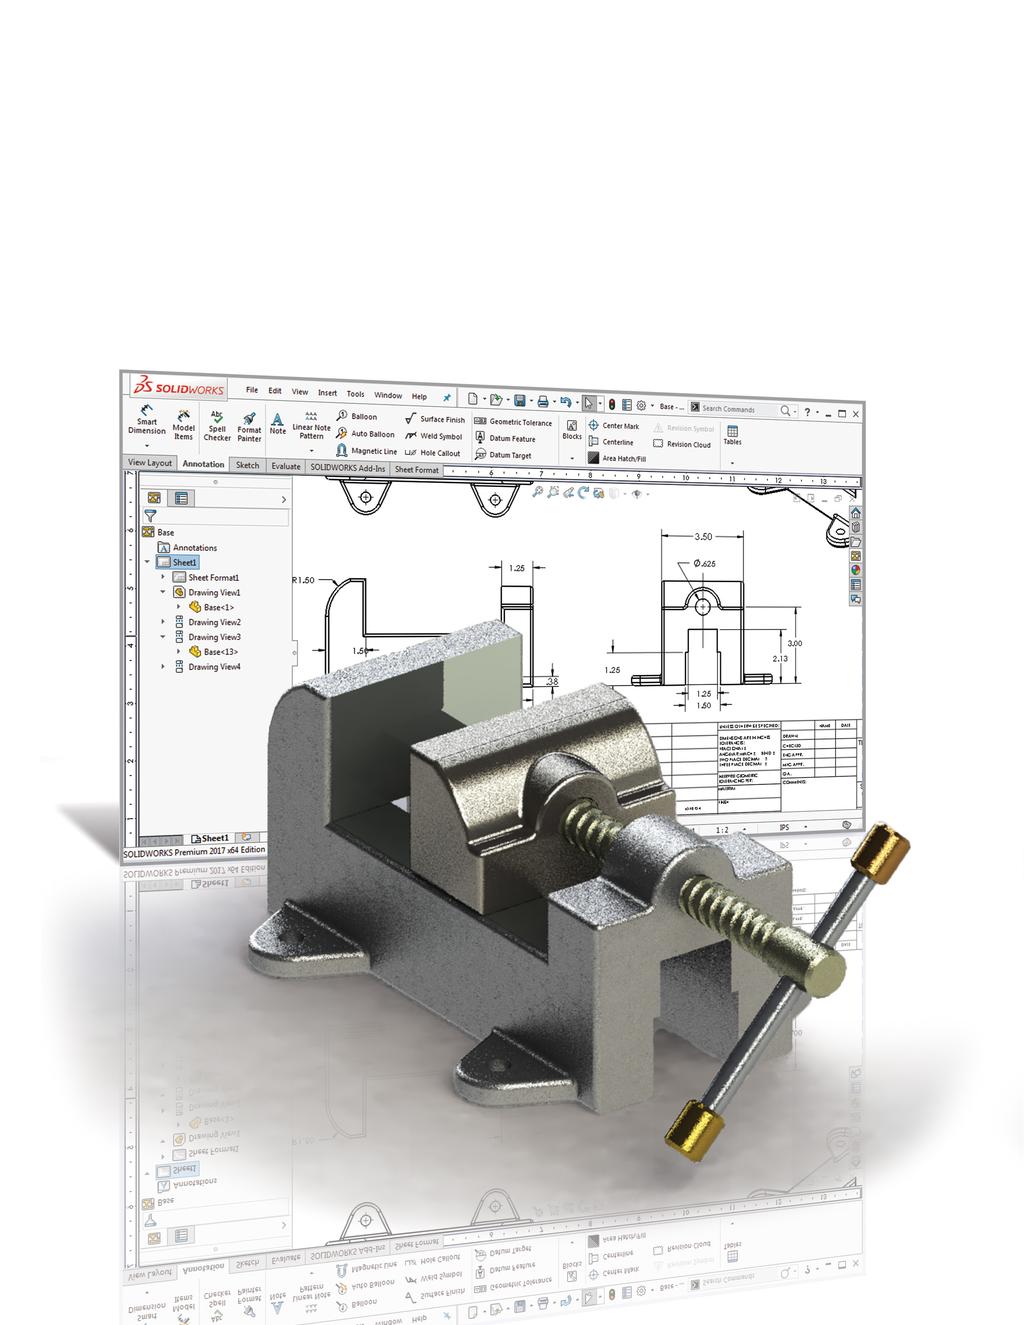 Parametric Modeling with SOLIDWORKS 2017 NEW Contains a